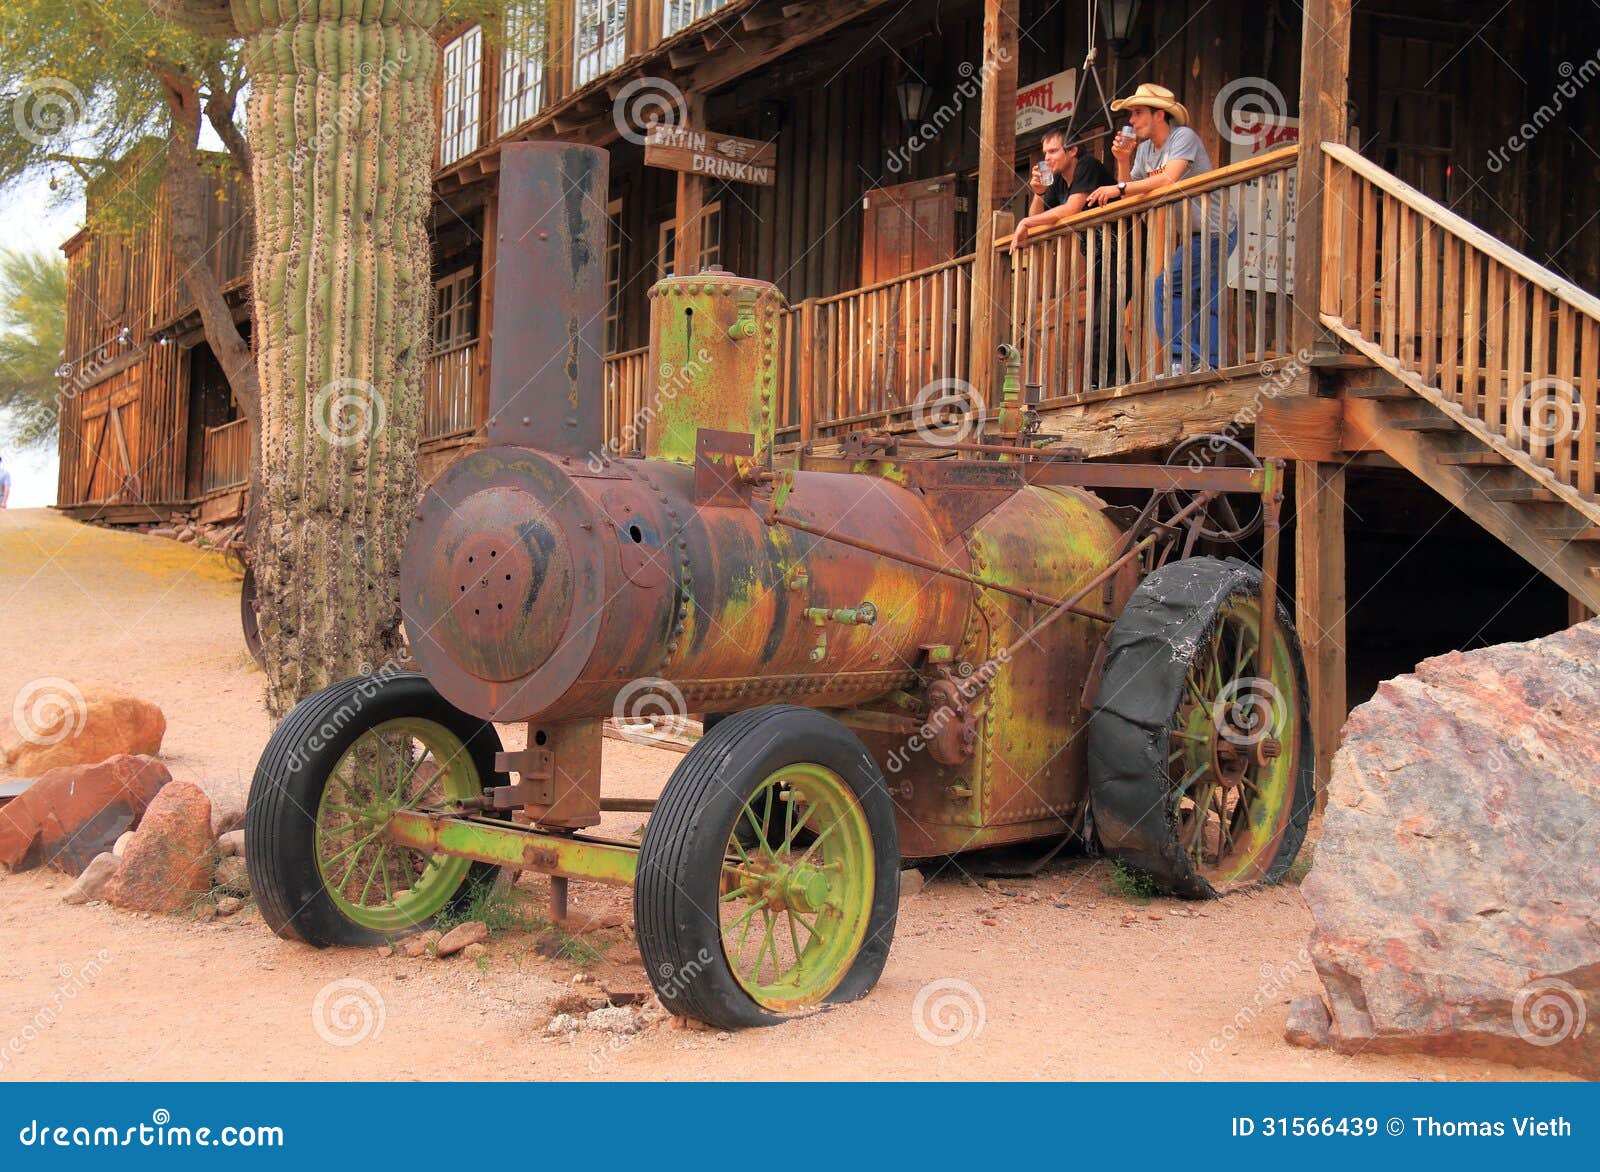  - antique-steam-tractor-as-tourist-attraction-ancient-attracts-tourists-to-mammoth-saloon-goldfield-arizona-old-31566439